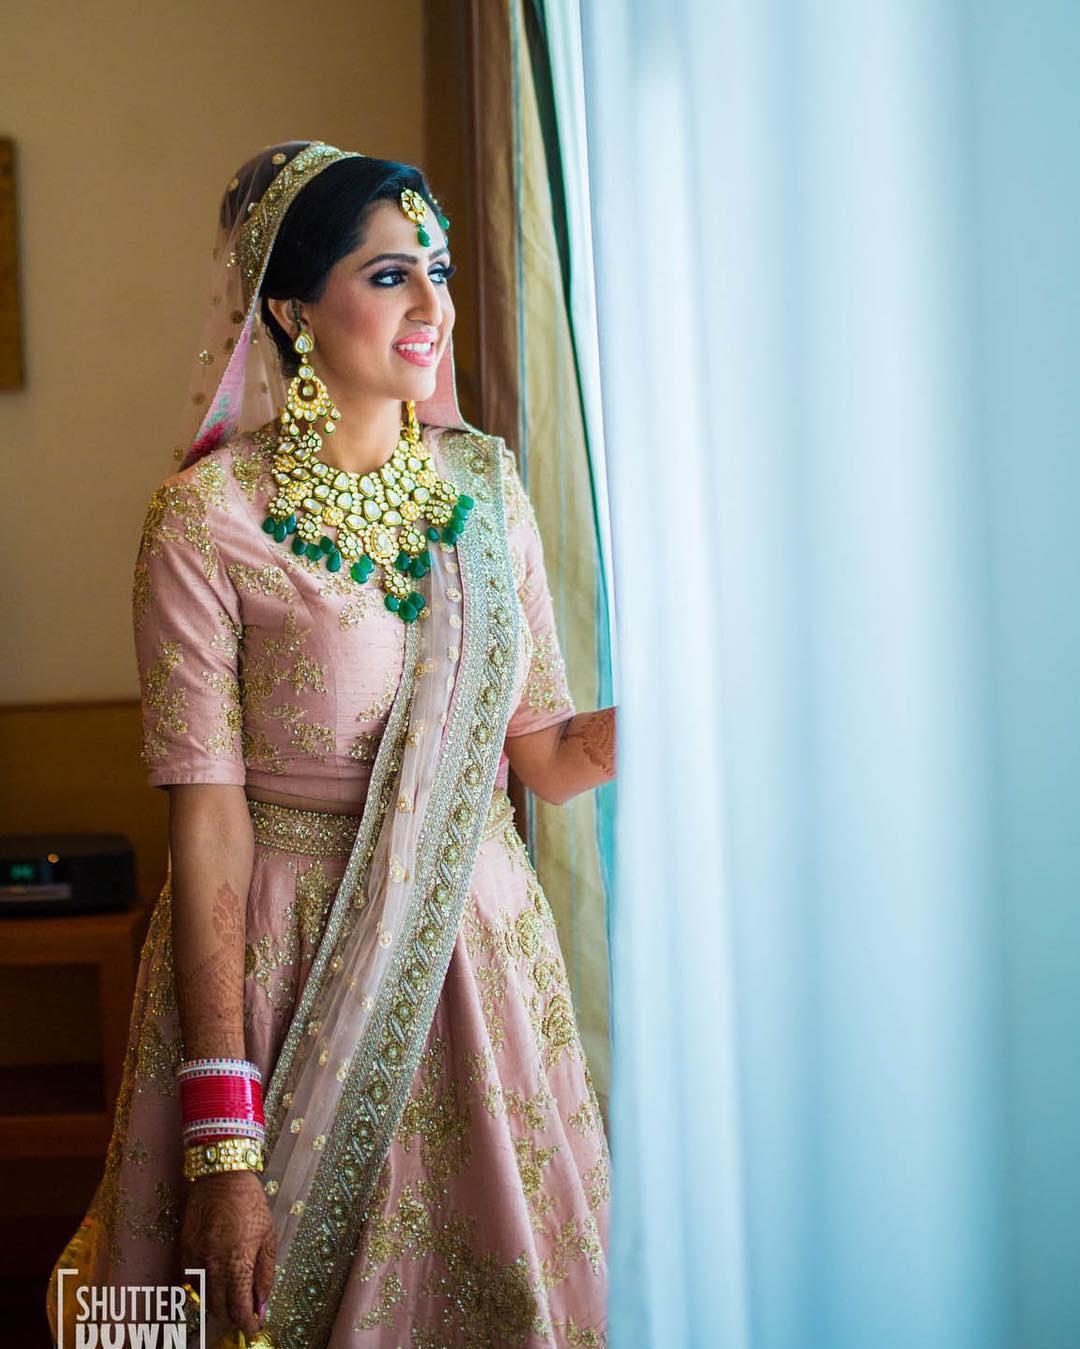 The Most Innovative Ways to Match Your Jewellery and Lehenga! | WedMeGood